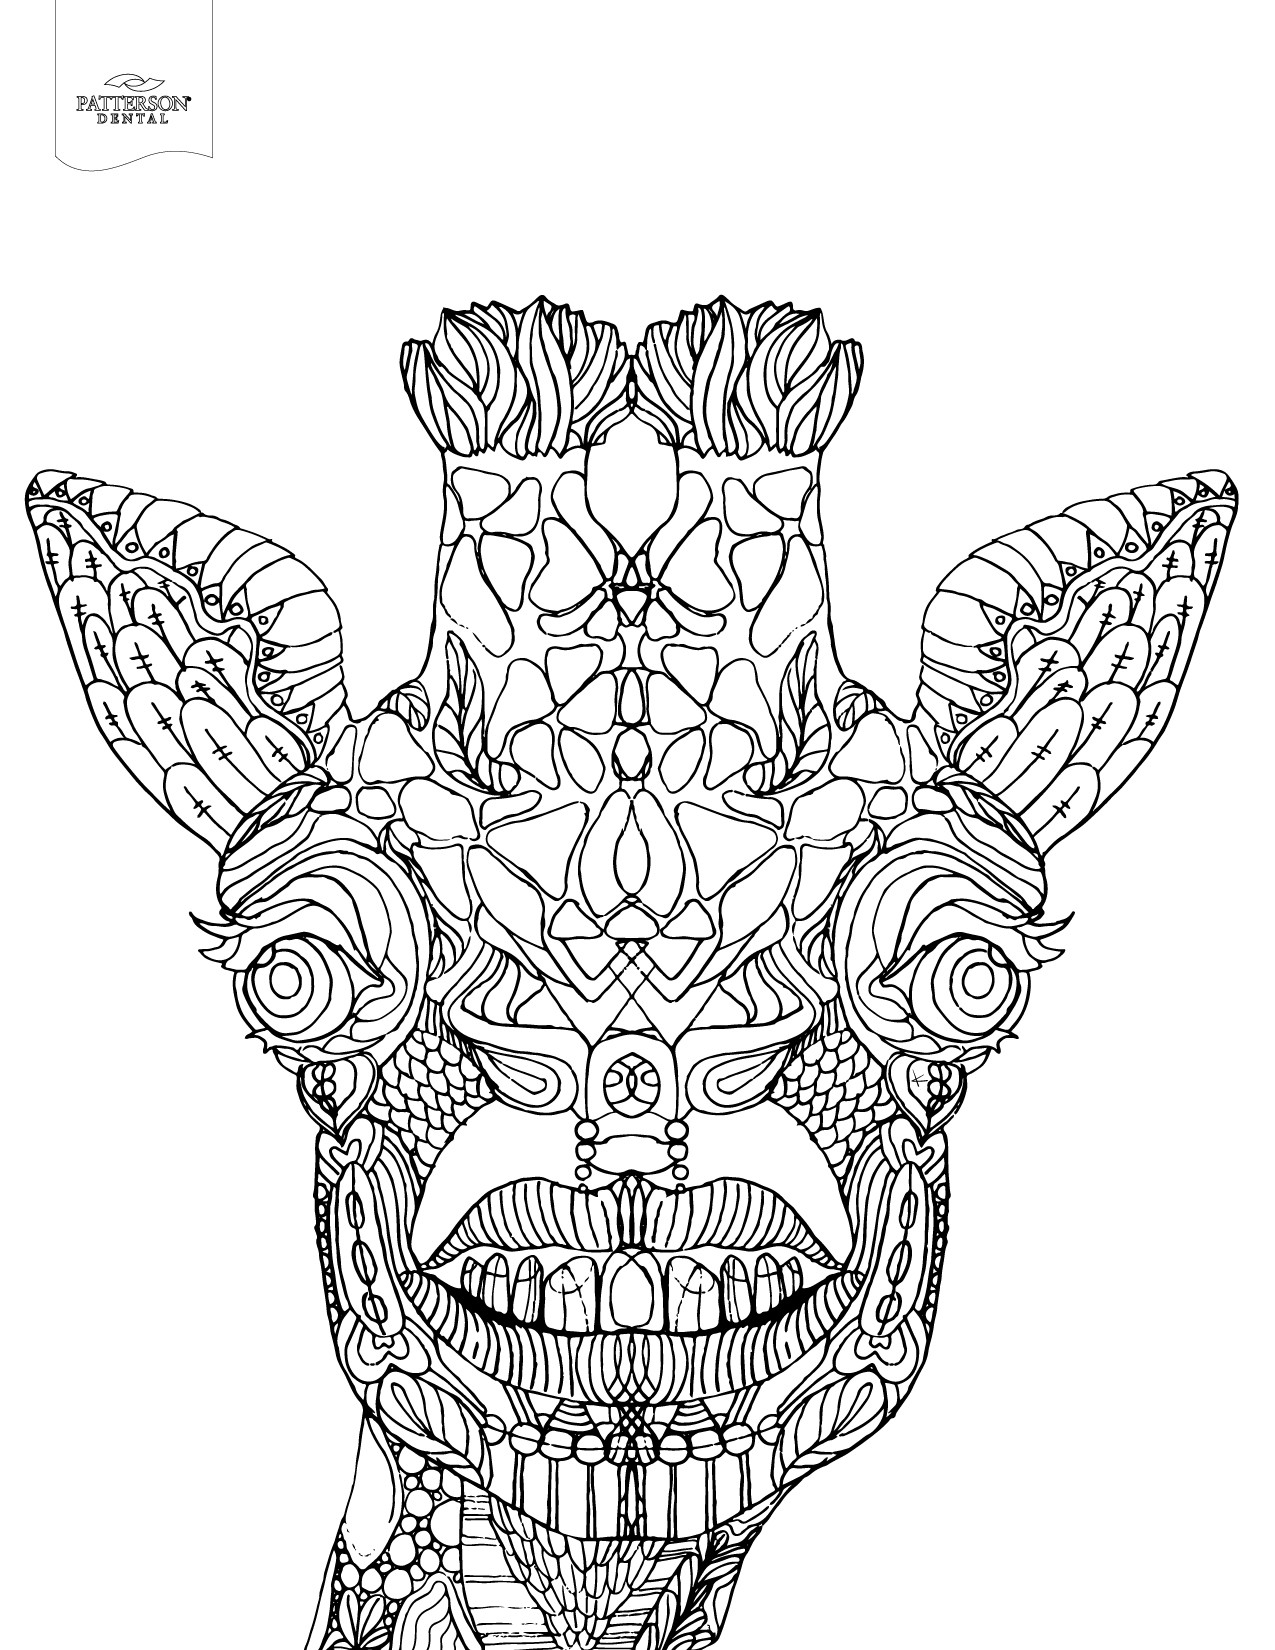 Giraffe Coloring Pages For Adults
 10 Toothy Adult Coloring Pages [Printable] – f the Cusp